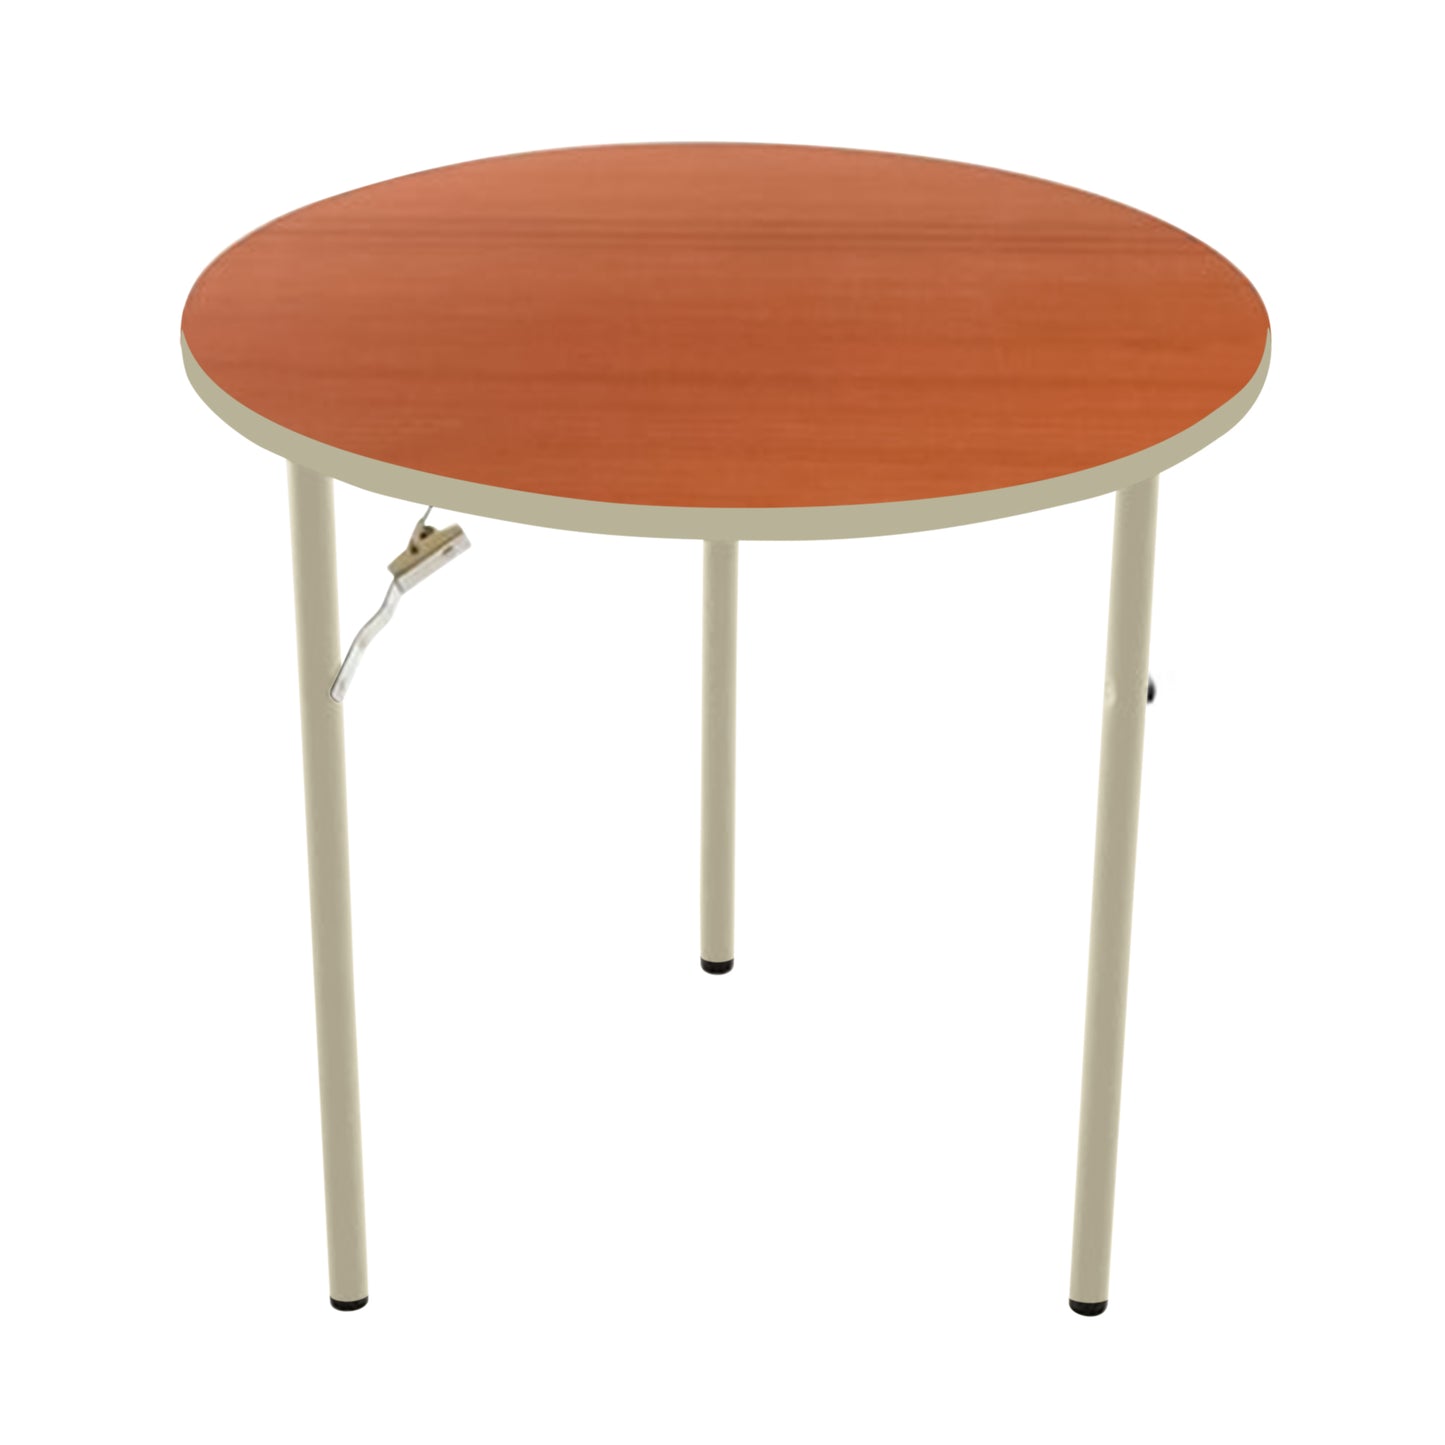 AmTab Folding Table - Plywood Stained and Sealed - Vinyl T-Molding Edge - Round - 48" Diameter x 29"H  (AmTab AMT-R48PM)